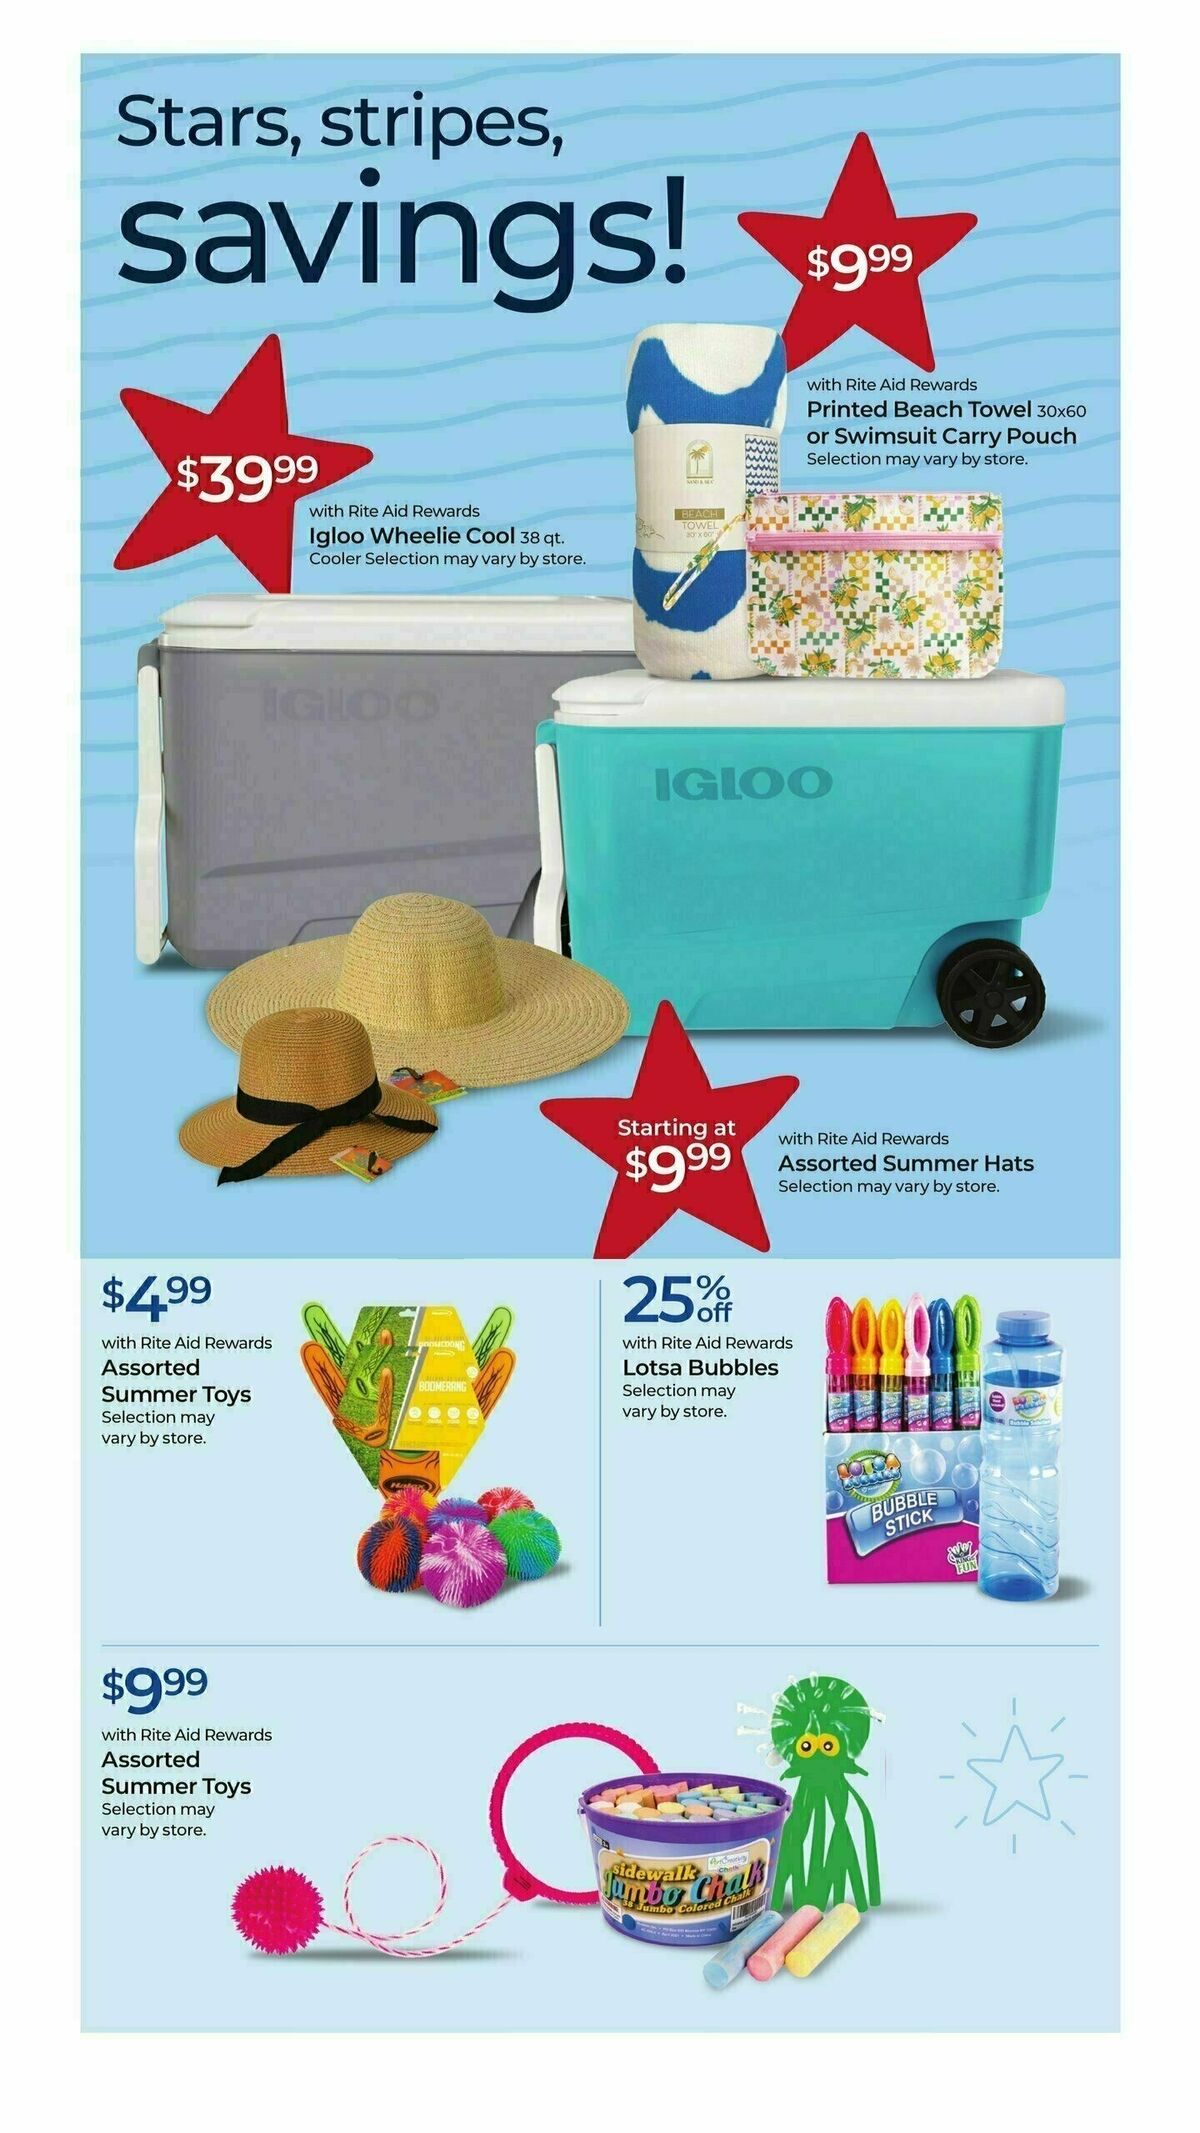 Rite Aid Weekly Ad from June 23